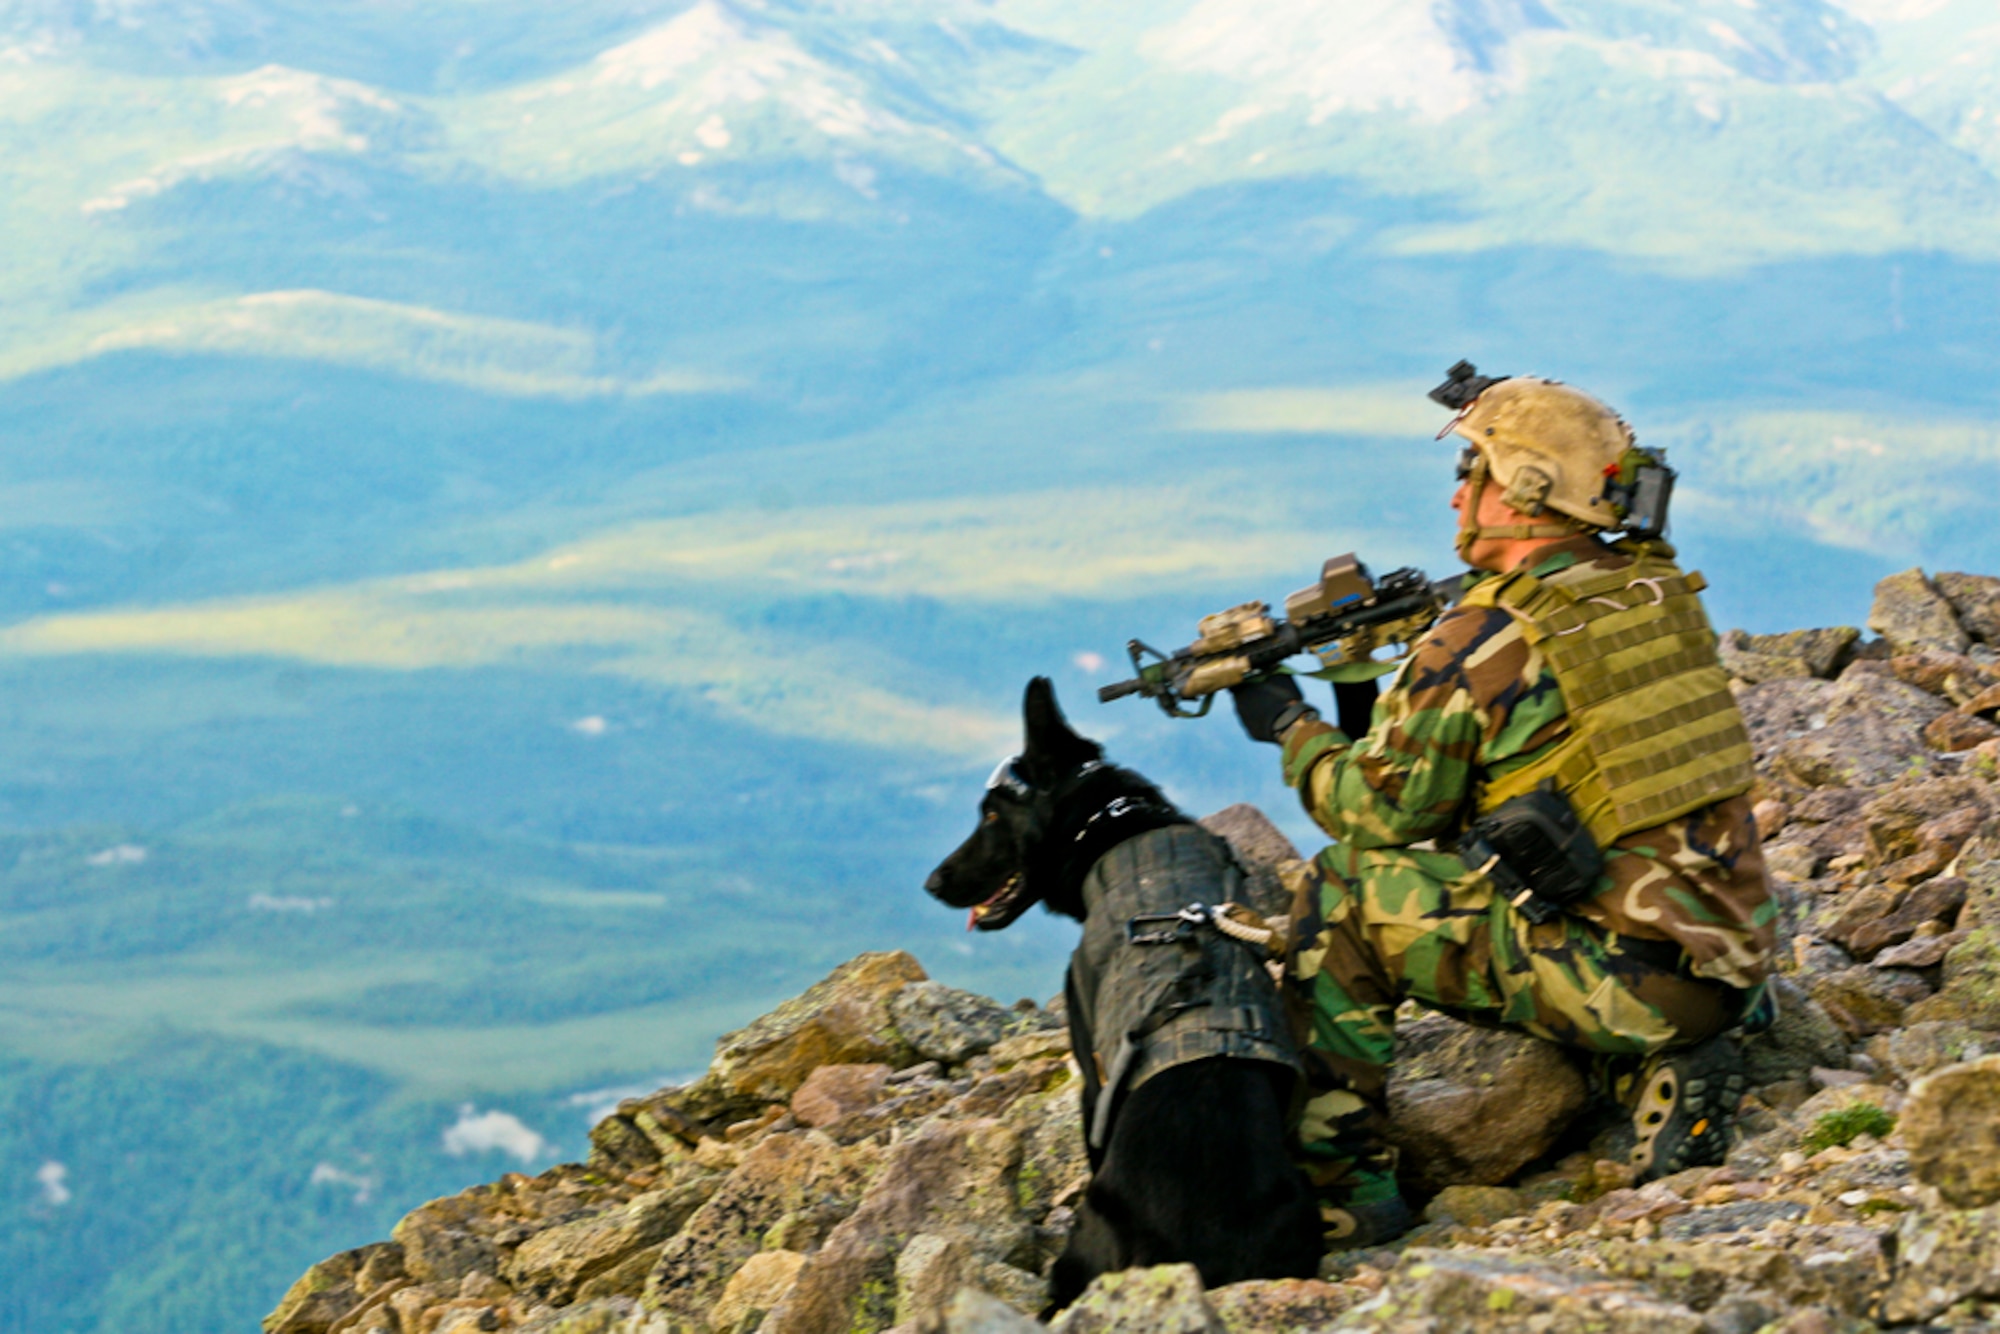 A SEAL perches next to his military working dog during training in the Joint Pacific Alaska Range Complex FORT WAINWRIGHT, Alaska -- Operators from a west-coast based Navy SEAL team participated in infiltration and exfiltration training as part of Northern Edge 2009 June 15, 2009. Army Task Force 49, 1-52 Aviation Regiment, B company, transported the SEALS in CH-47D "Chinook" helicopters, performing two-wheel landings atop mountainous terrain in the Joint Pacific Alaska Range Complex. Exercise Northern Edge is a trainning exercise designed to promote and improve interoperability.
(U.S. Marine Corps Photo/Lance Cpl. Ryan Rholes)